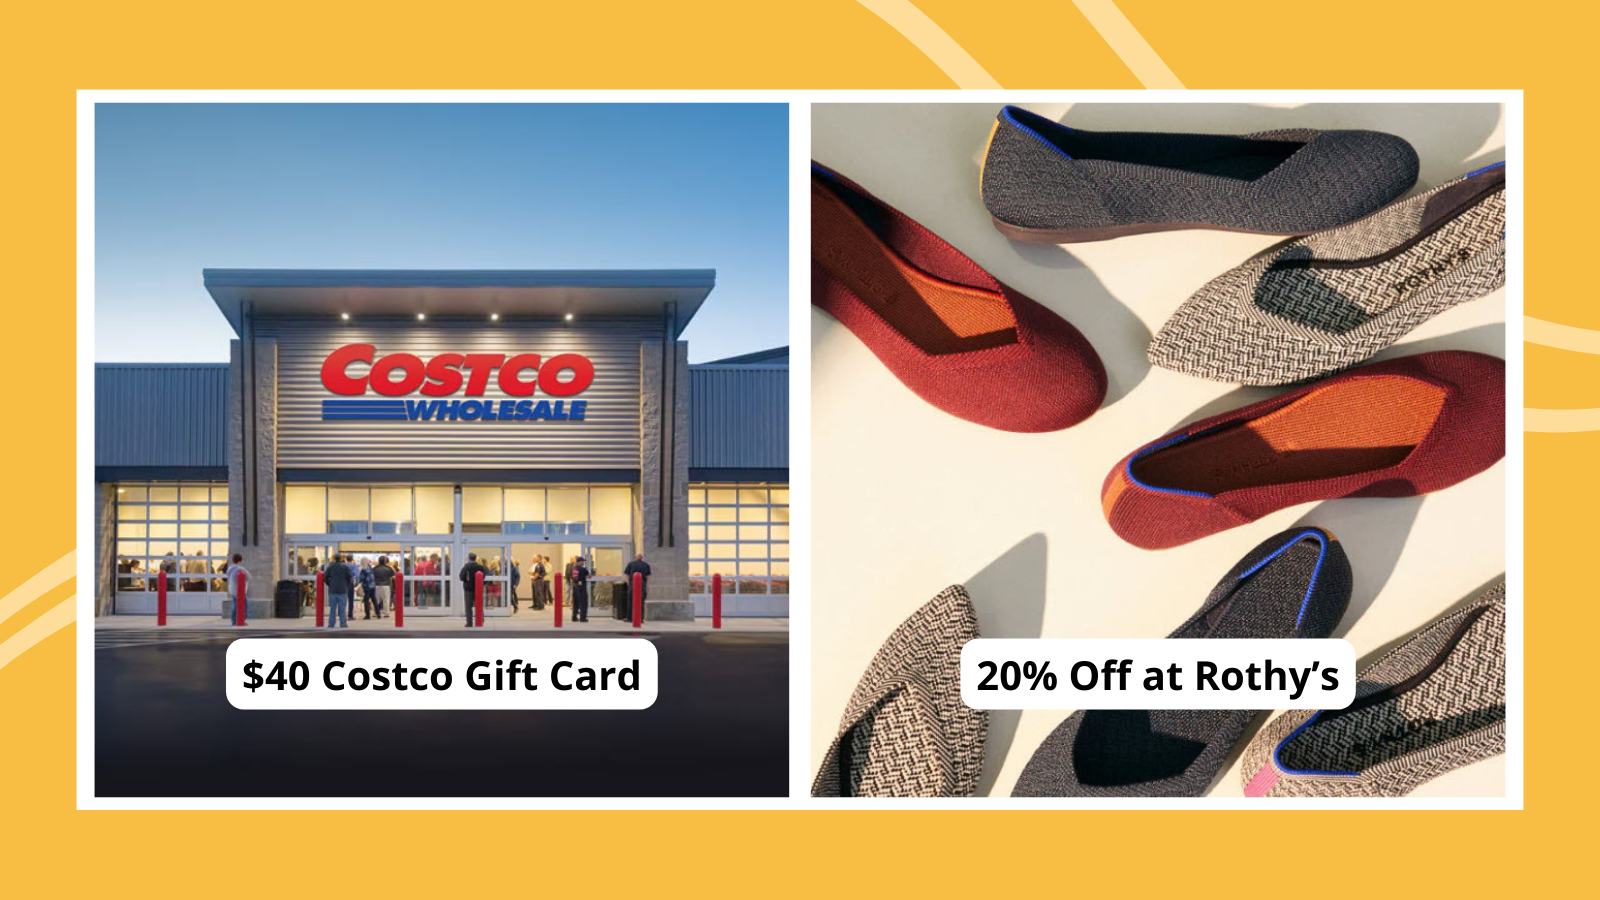 Collage of teacher discounts, including $30 Costco gift card and 20% off at Rothy's